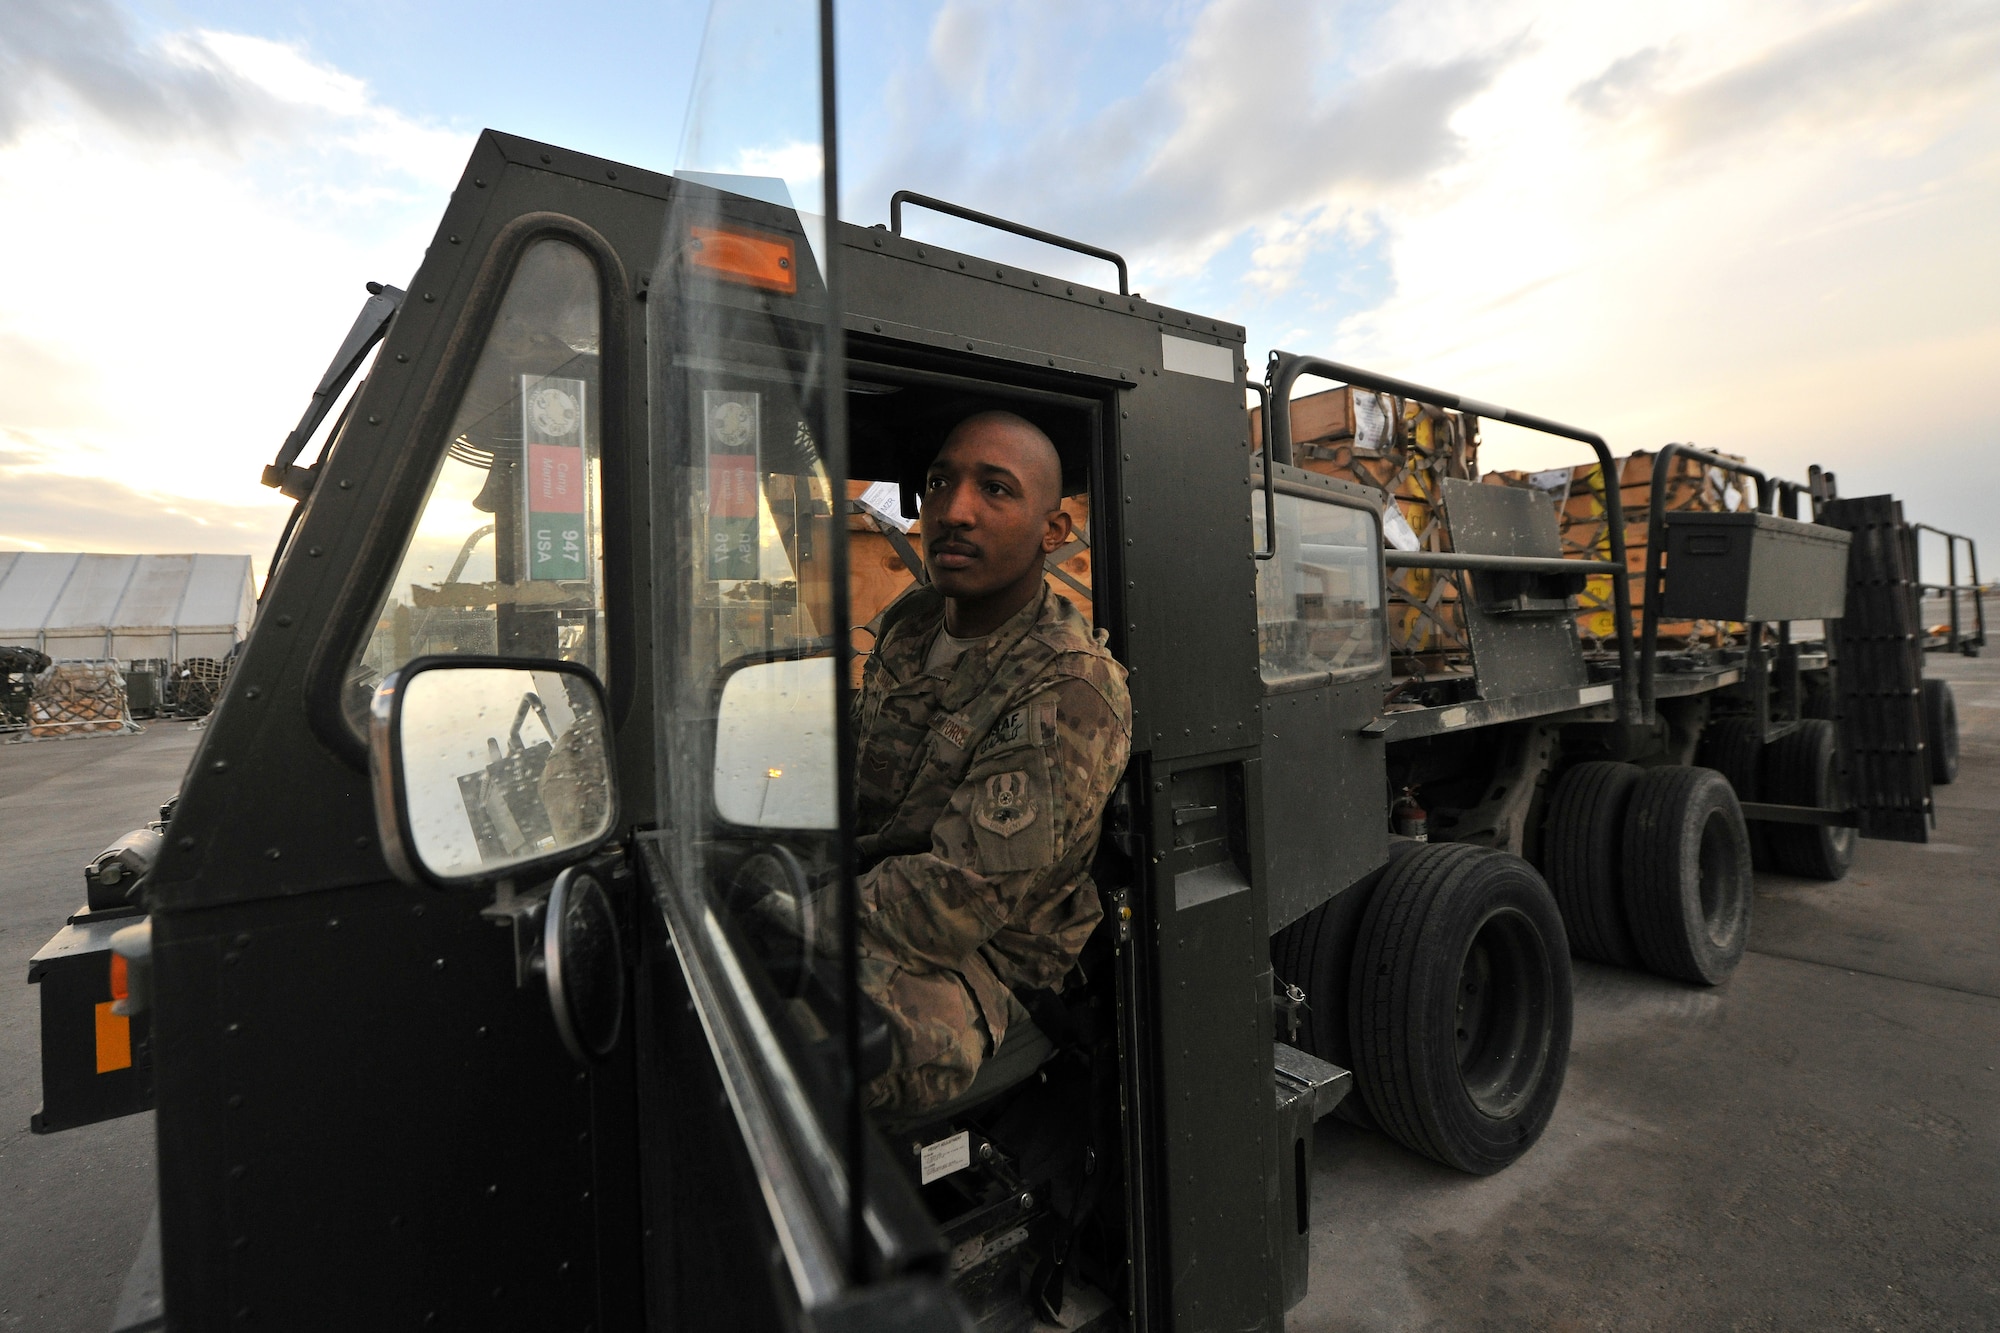 Airman 1st Class Robert Williams, 455th Expeditionary Aerial Port Squadron, Detachment 3 Aerial Port specialist, drives a 60K aircraft loader across the contingency cargo staging yard at Camp Marmal, Afghanistan, Jan 30, 2013. The port Airmen move more than 2,600 tons of cargo and 2,200 personnel each month in support of combat sustainment operations.  (U.S. Air Force photo/Senior Airman Chris Willis)